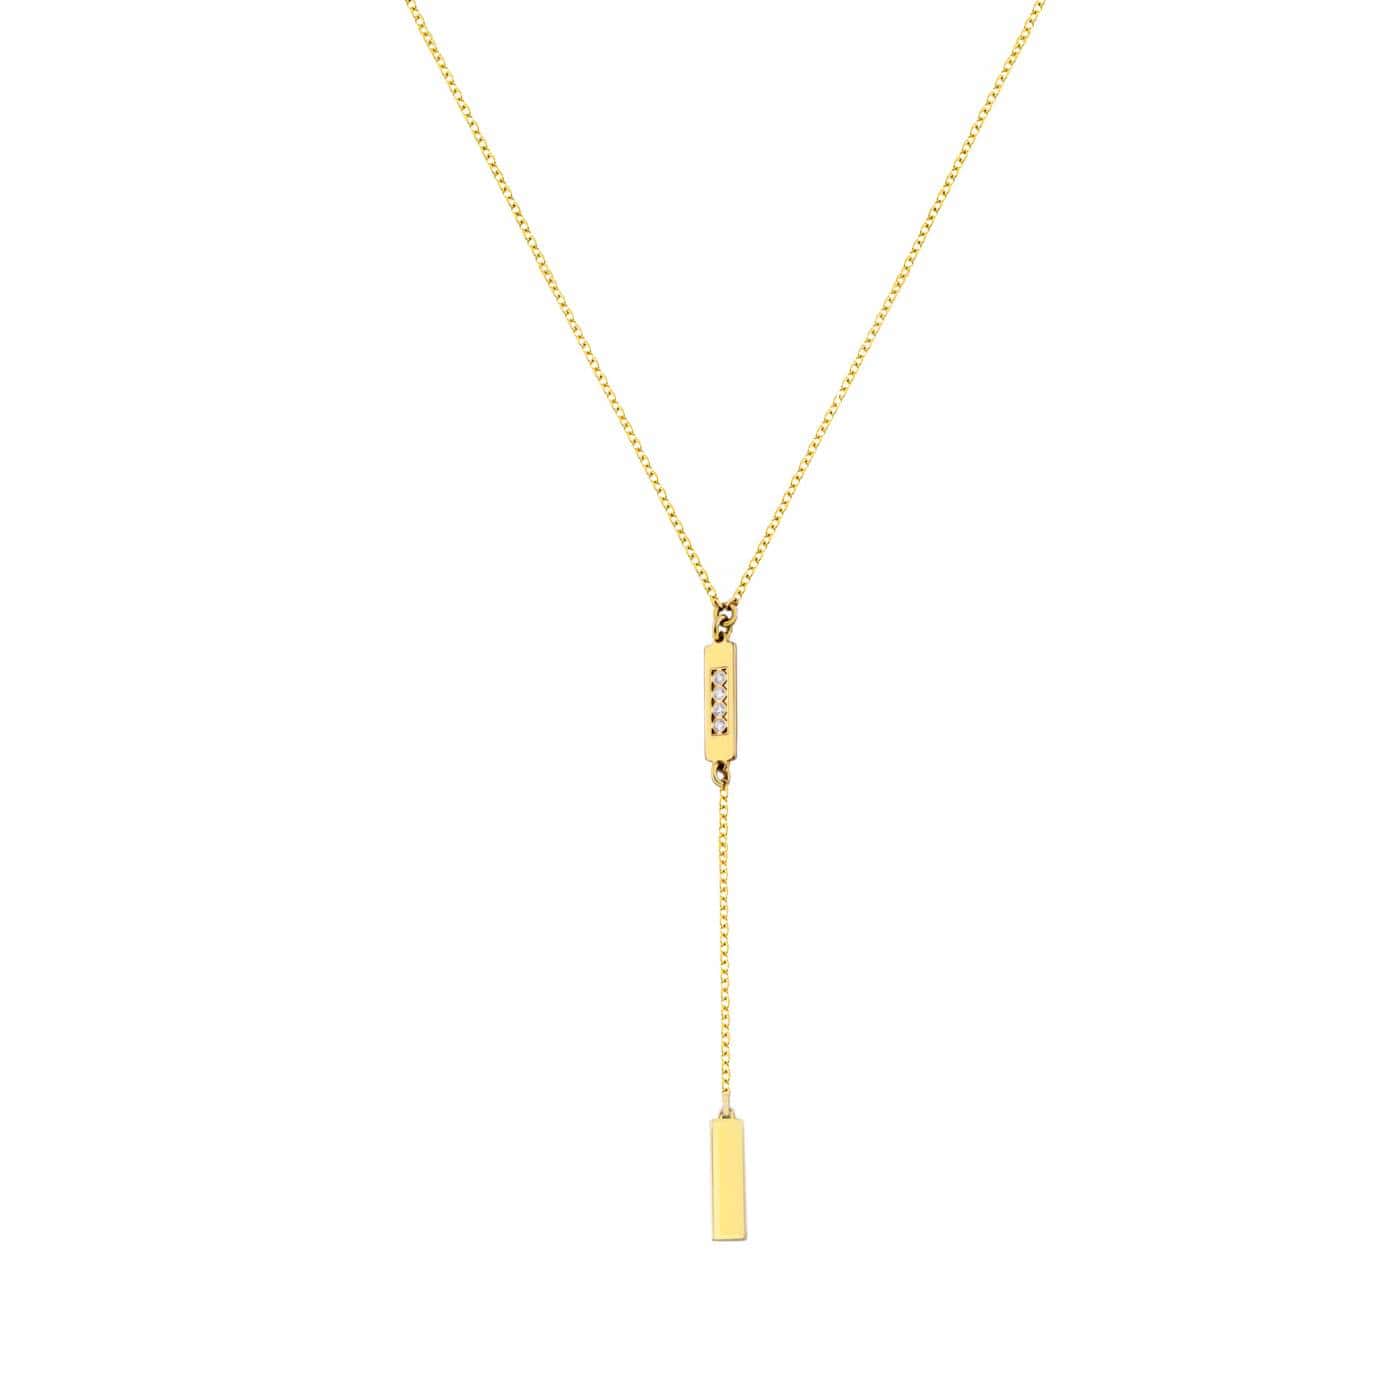 GOLD 14K NECKLACE WITH DIAMONDS